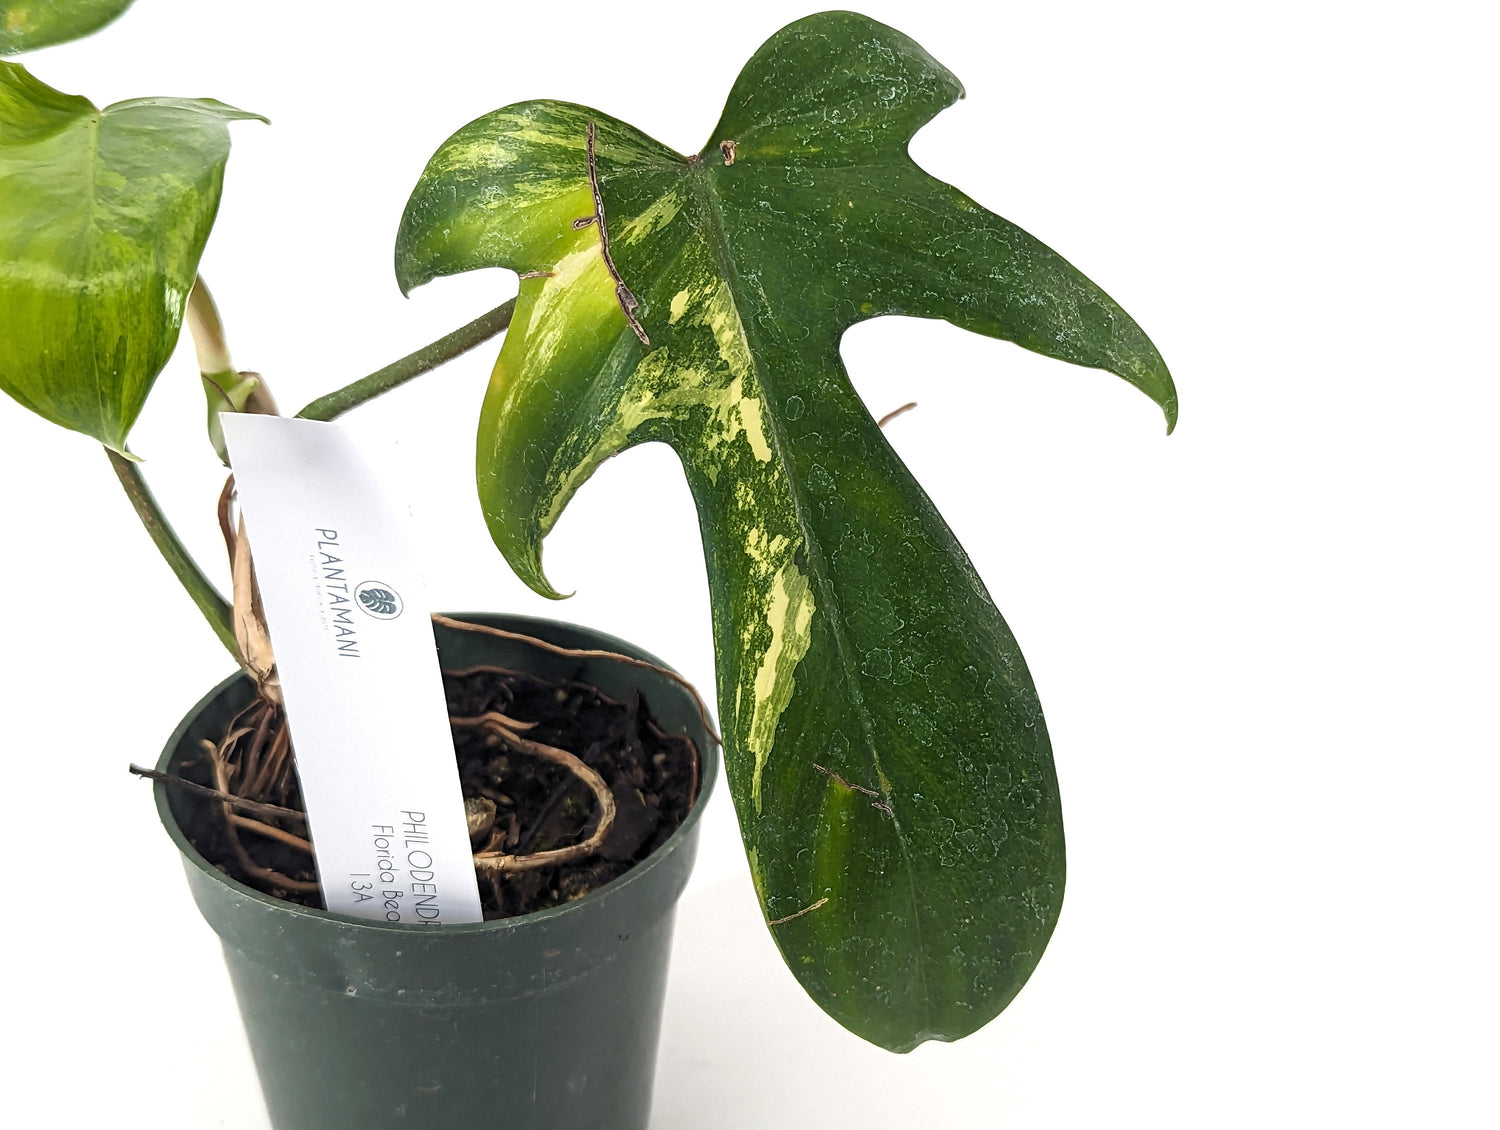 Philodendron Florida Beauty - Exact Plants Pictured